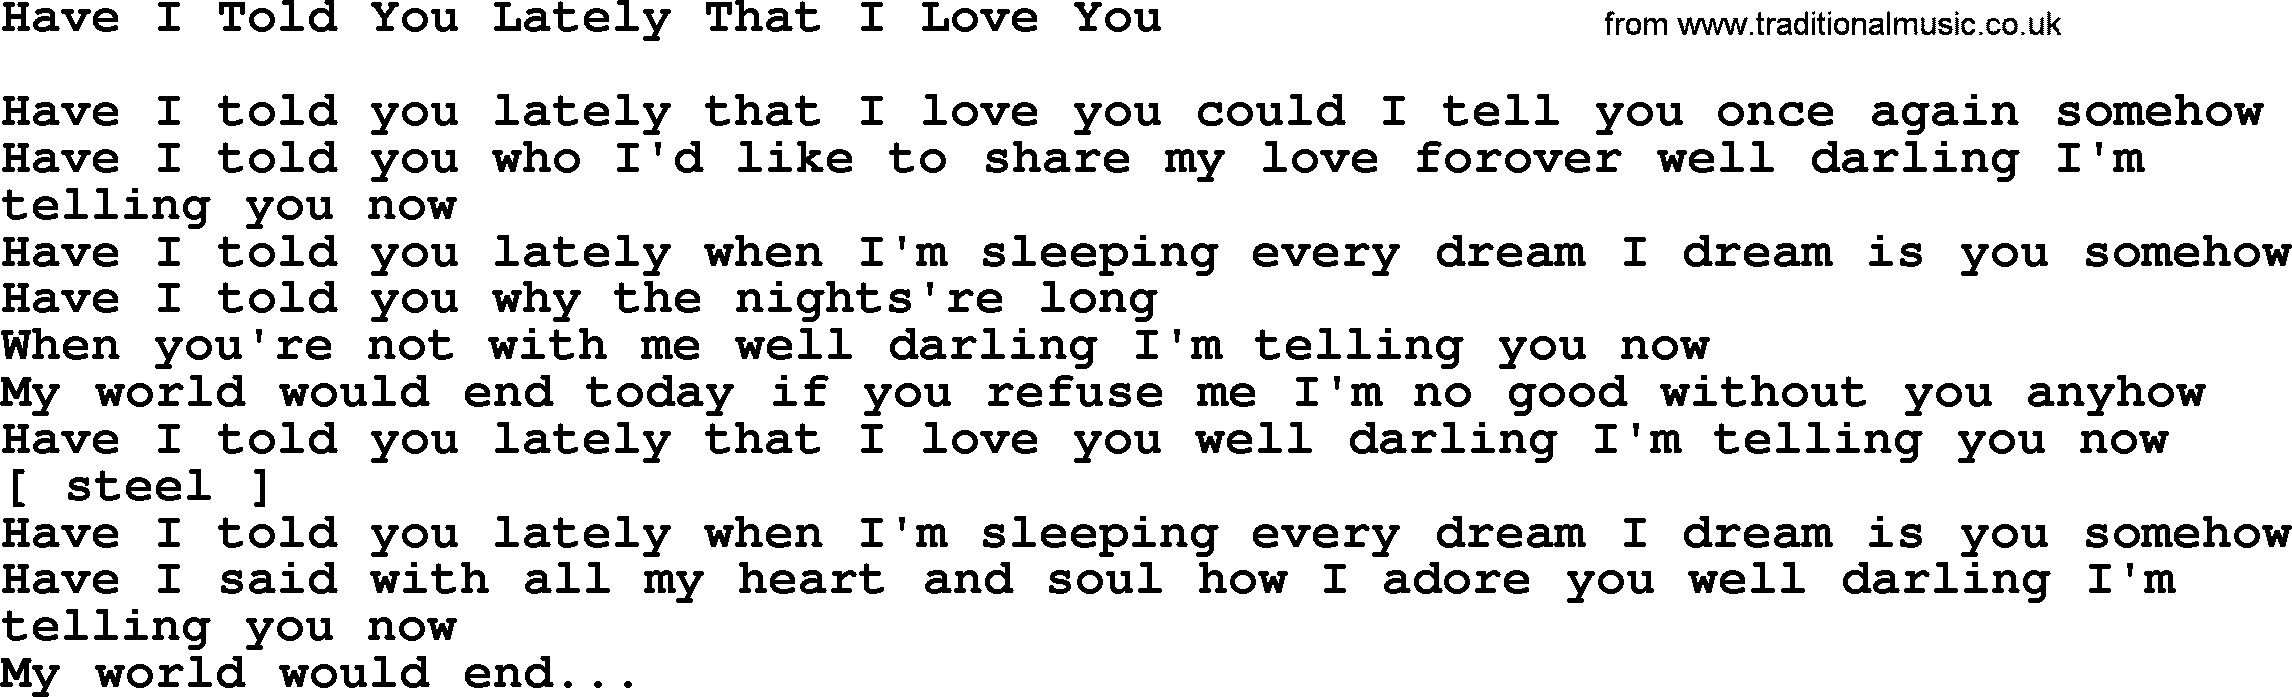 Marty Robbins song: Have I Told You Lately That I Love You, lyrics